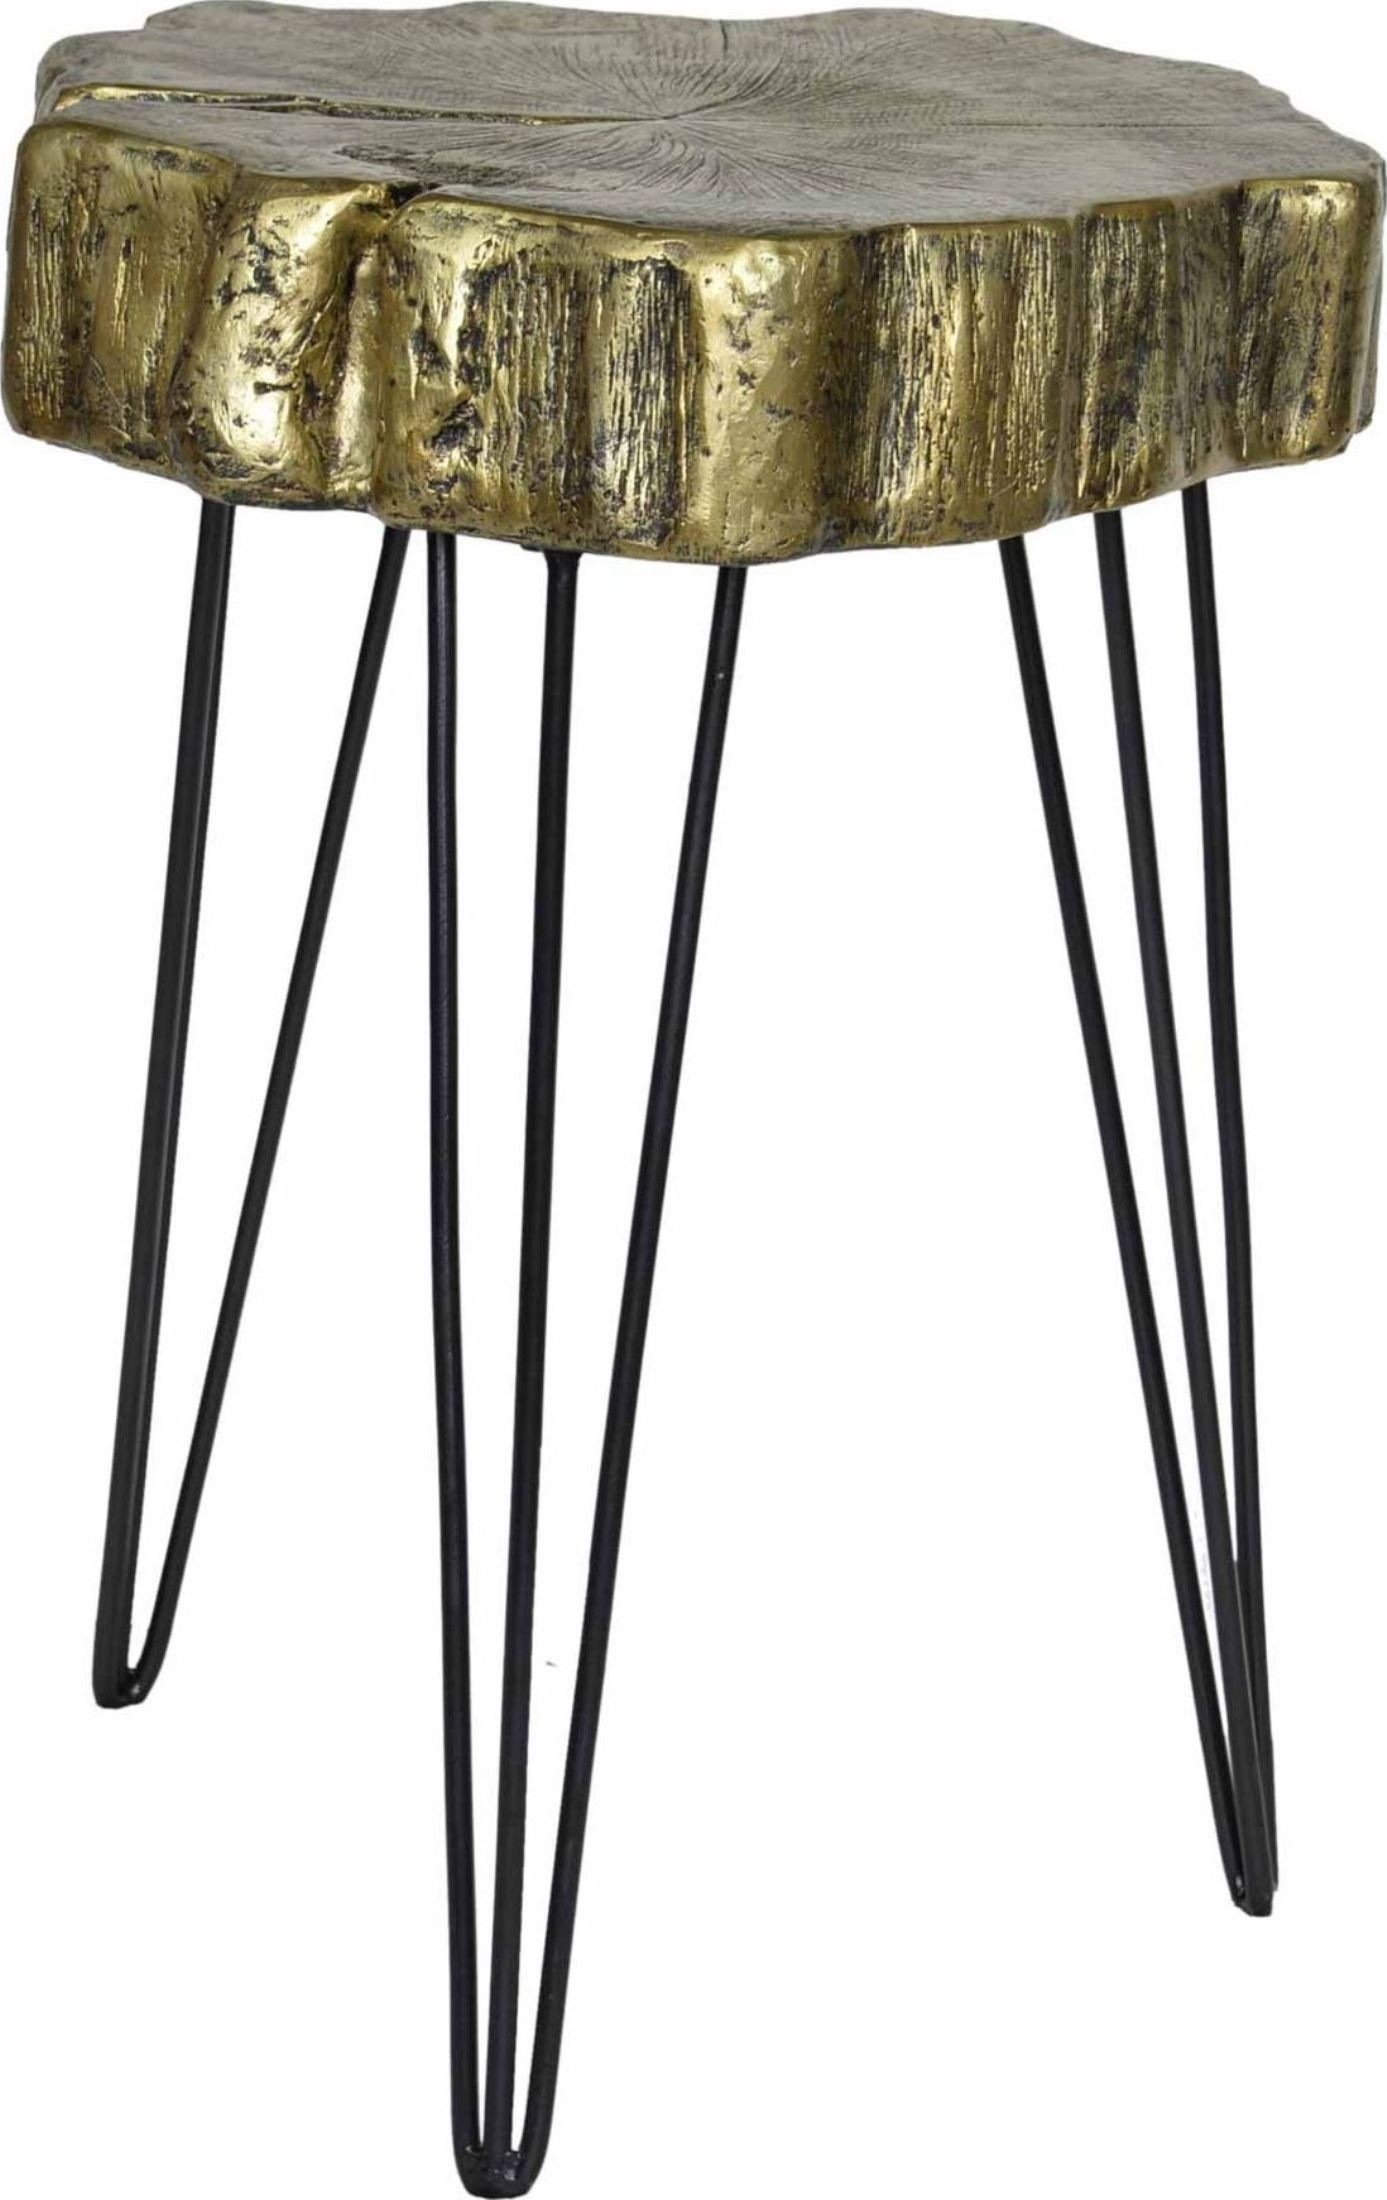 wafer painted accent table from moes home coleman furniture metal bronze bedside conversation sets inexpensive house decor goods tables end lamps astoria patio childrens wooden